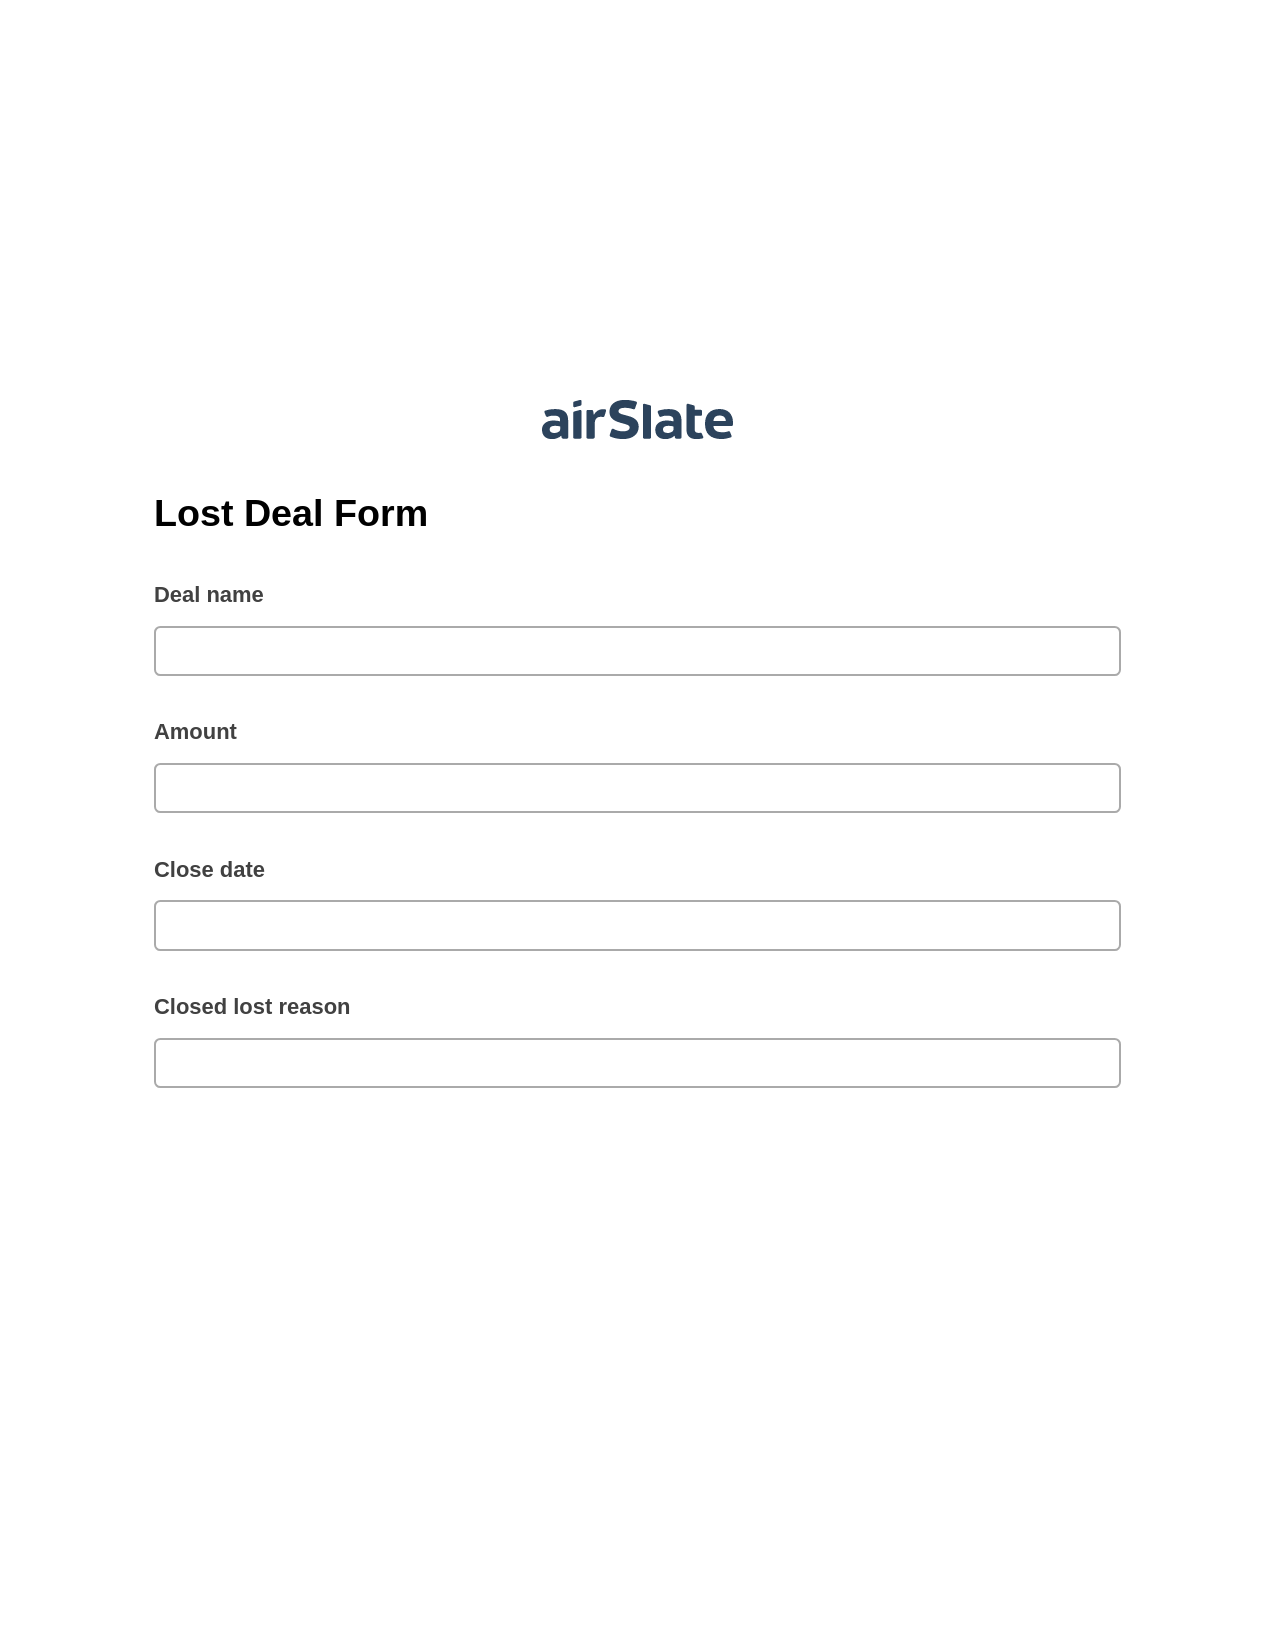 Lost Deal Form Prefill from NetSuite records, Custom Field's Value Bot, Export to Excel 365 Bot